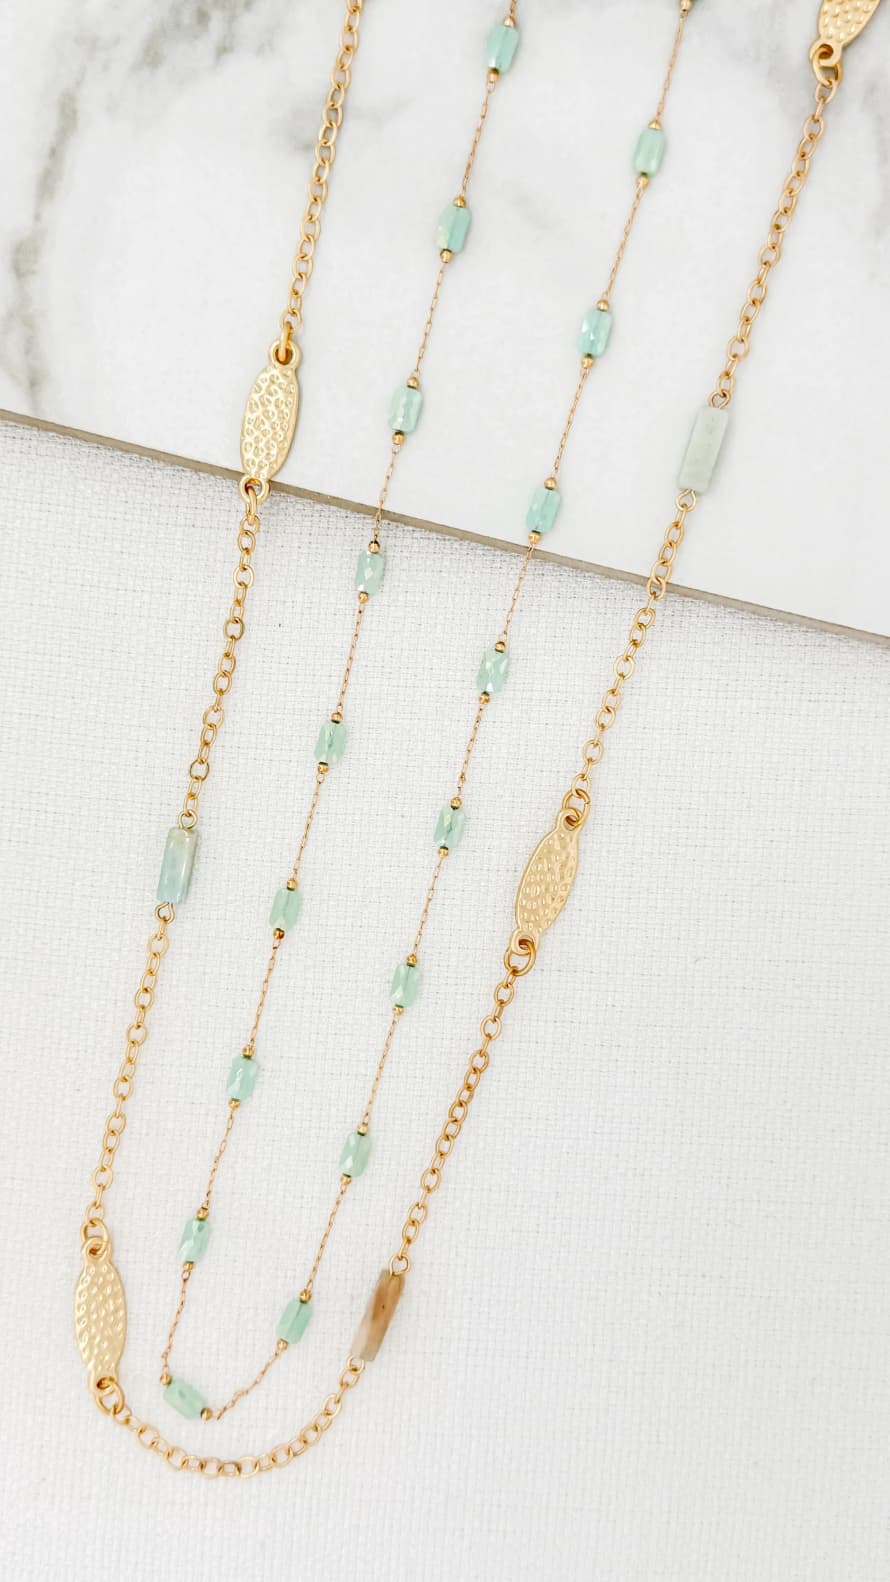 Envy Double Layer Necklace with Battered Gold Ovals and Green Stones